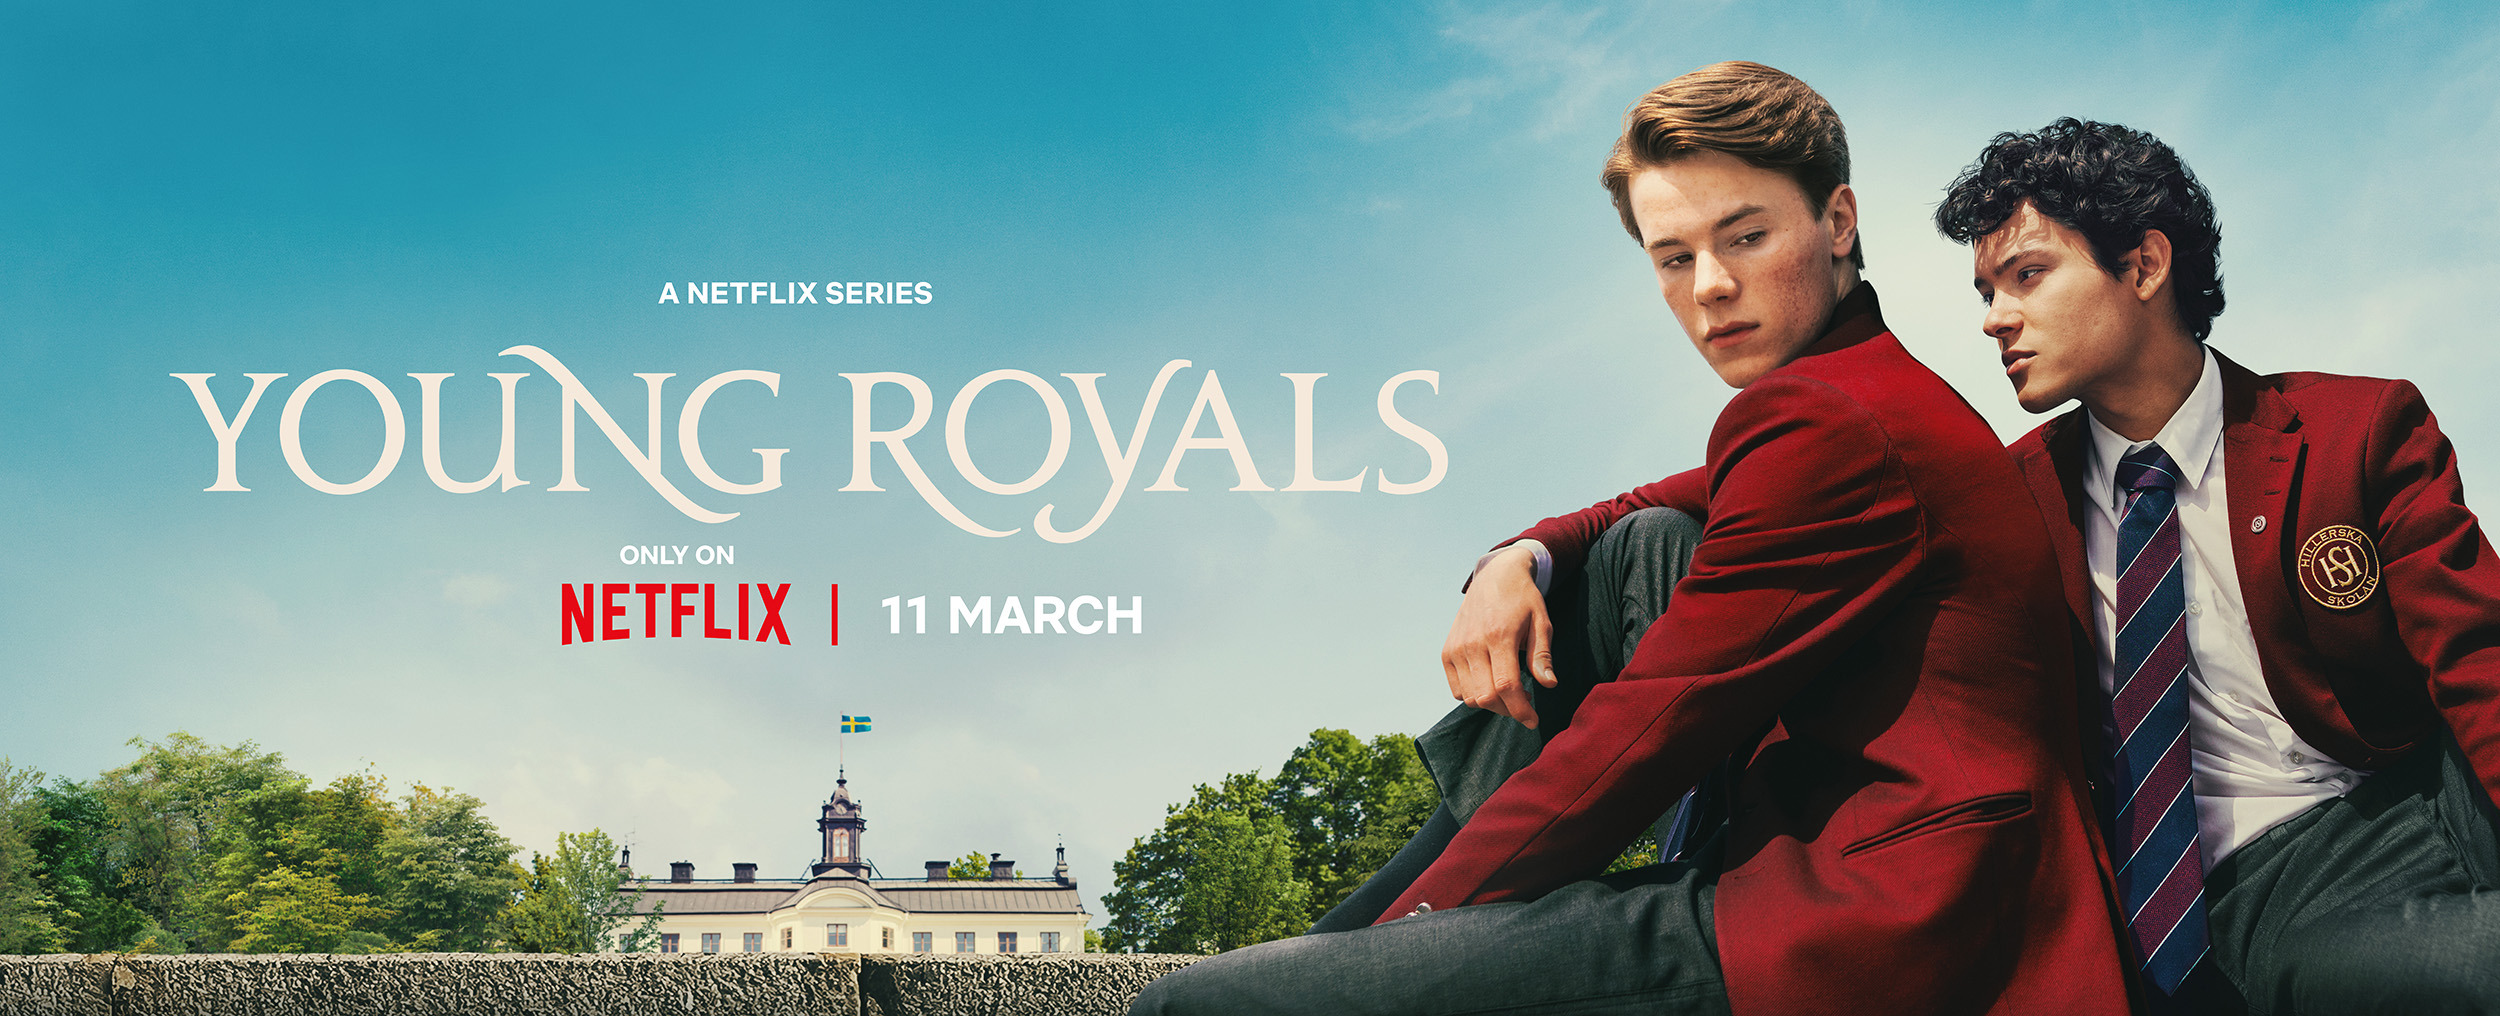 Mega Sized TV Poster Image for Young Royals (#4 of 4)